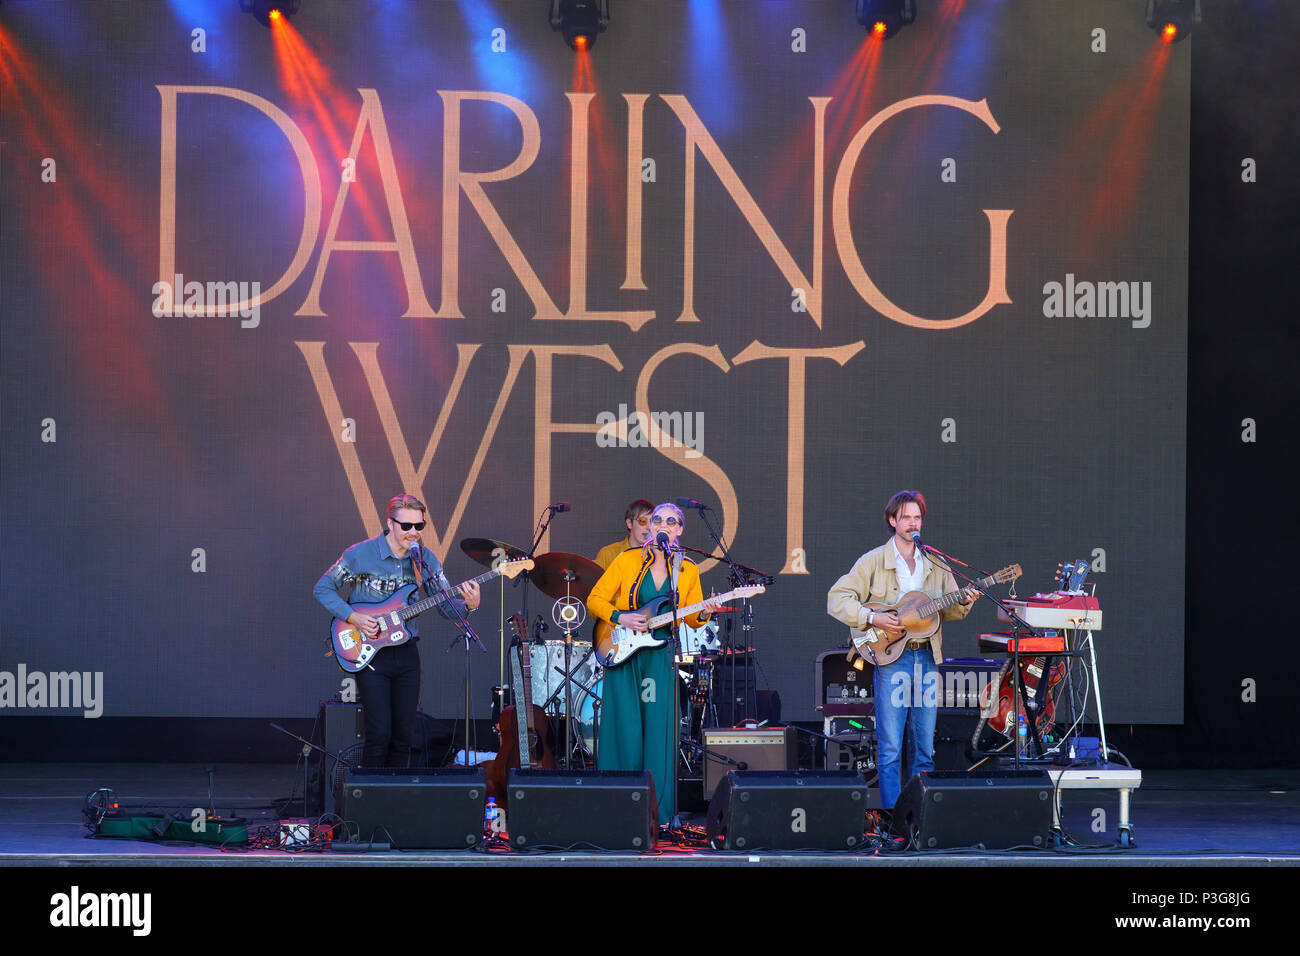 Norway, Oslo - June 16, 2018. The Norwegian folk and country band Darling West performs a live concert during the Norwegian music festival Piknik i Parken 2018 in Oslo. Here vocalist and singer Mari Sandvær Kreken is seen live on stage with musician Tor Egil Kreken (L). (Photo credit: Gonzales Photo - Stian S. Moller). Stock Photo